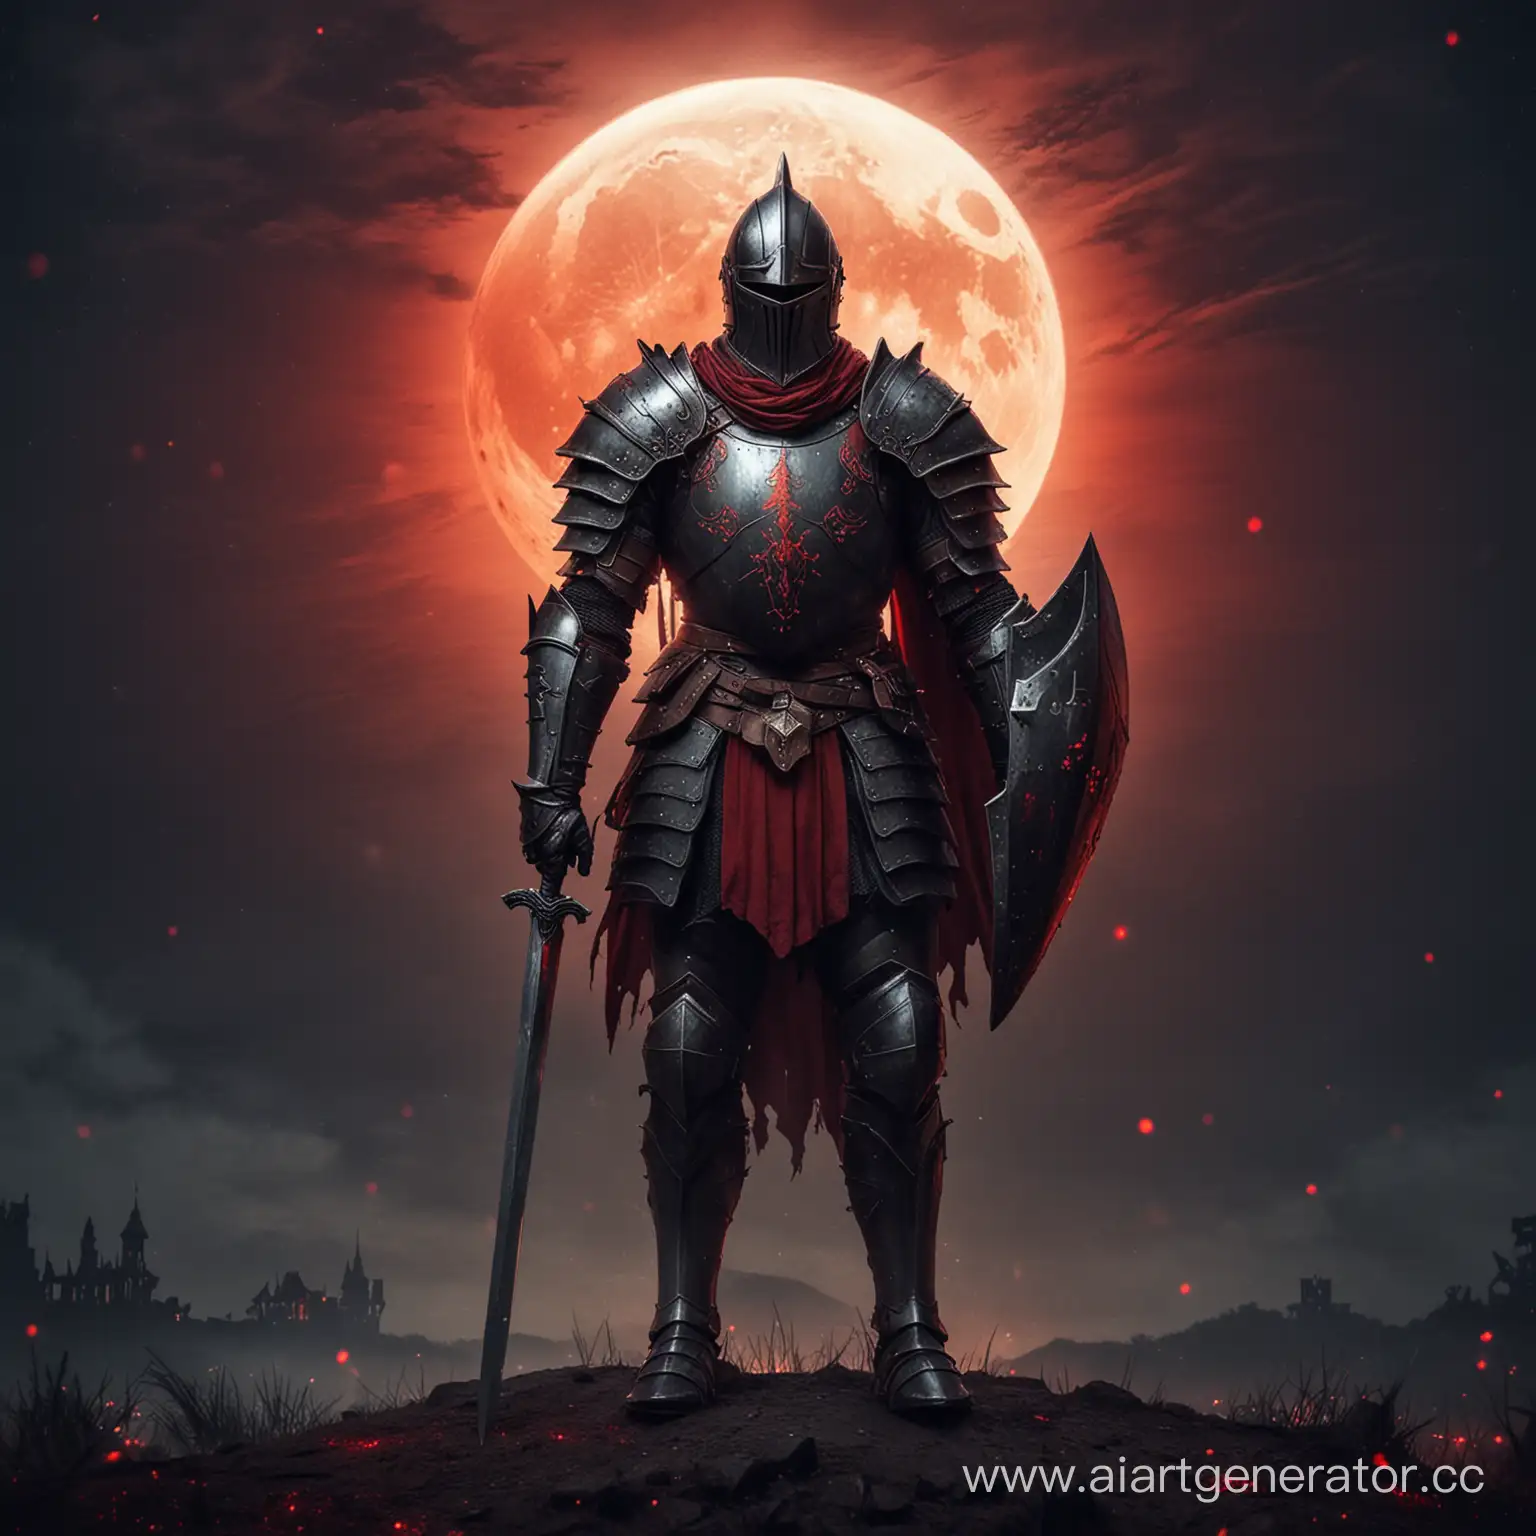 Knight-in-Red-Moonlight-Armored-Figure-Under-the-Night-Sky